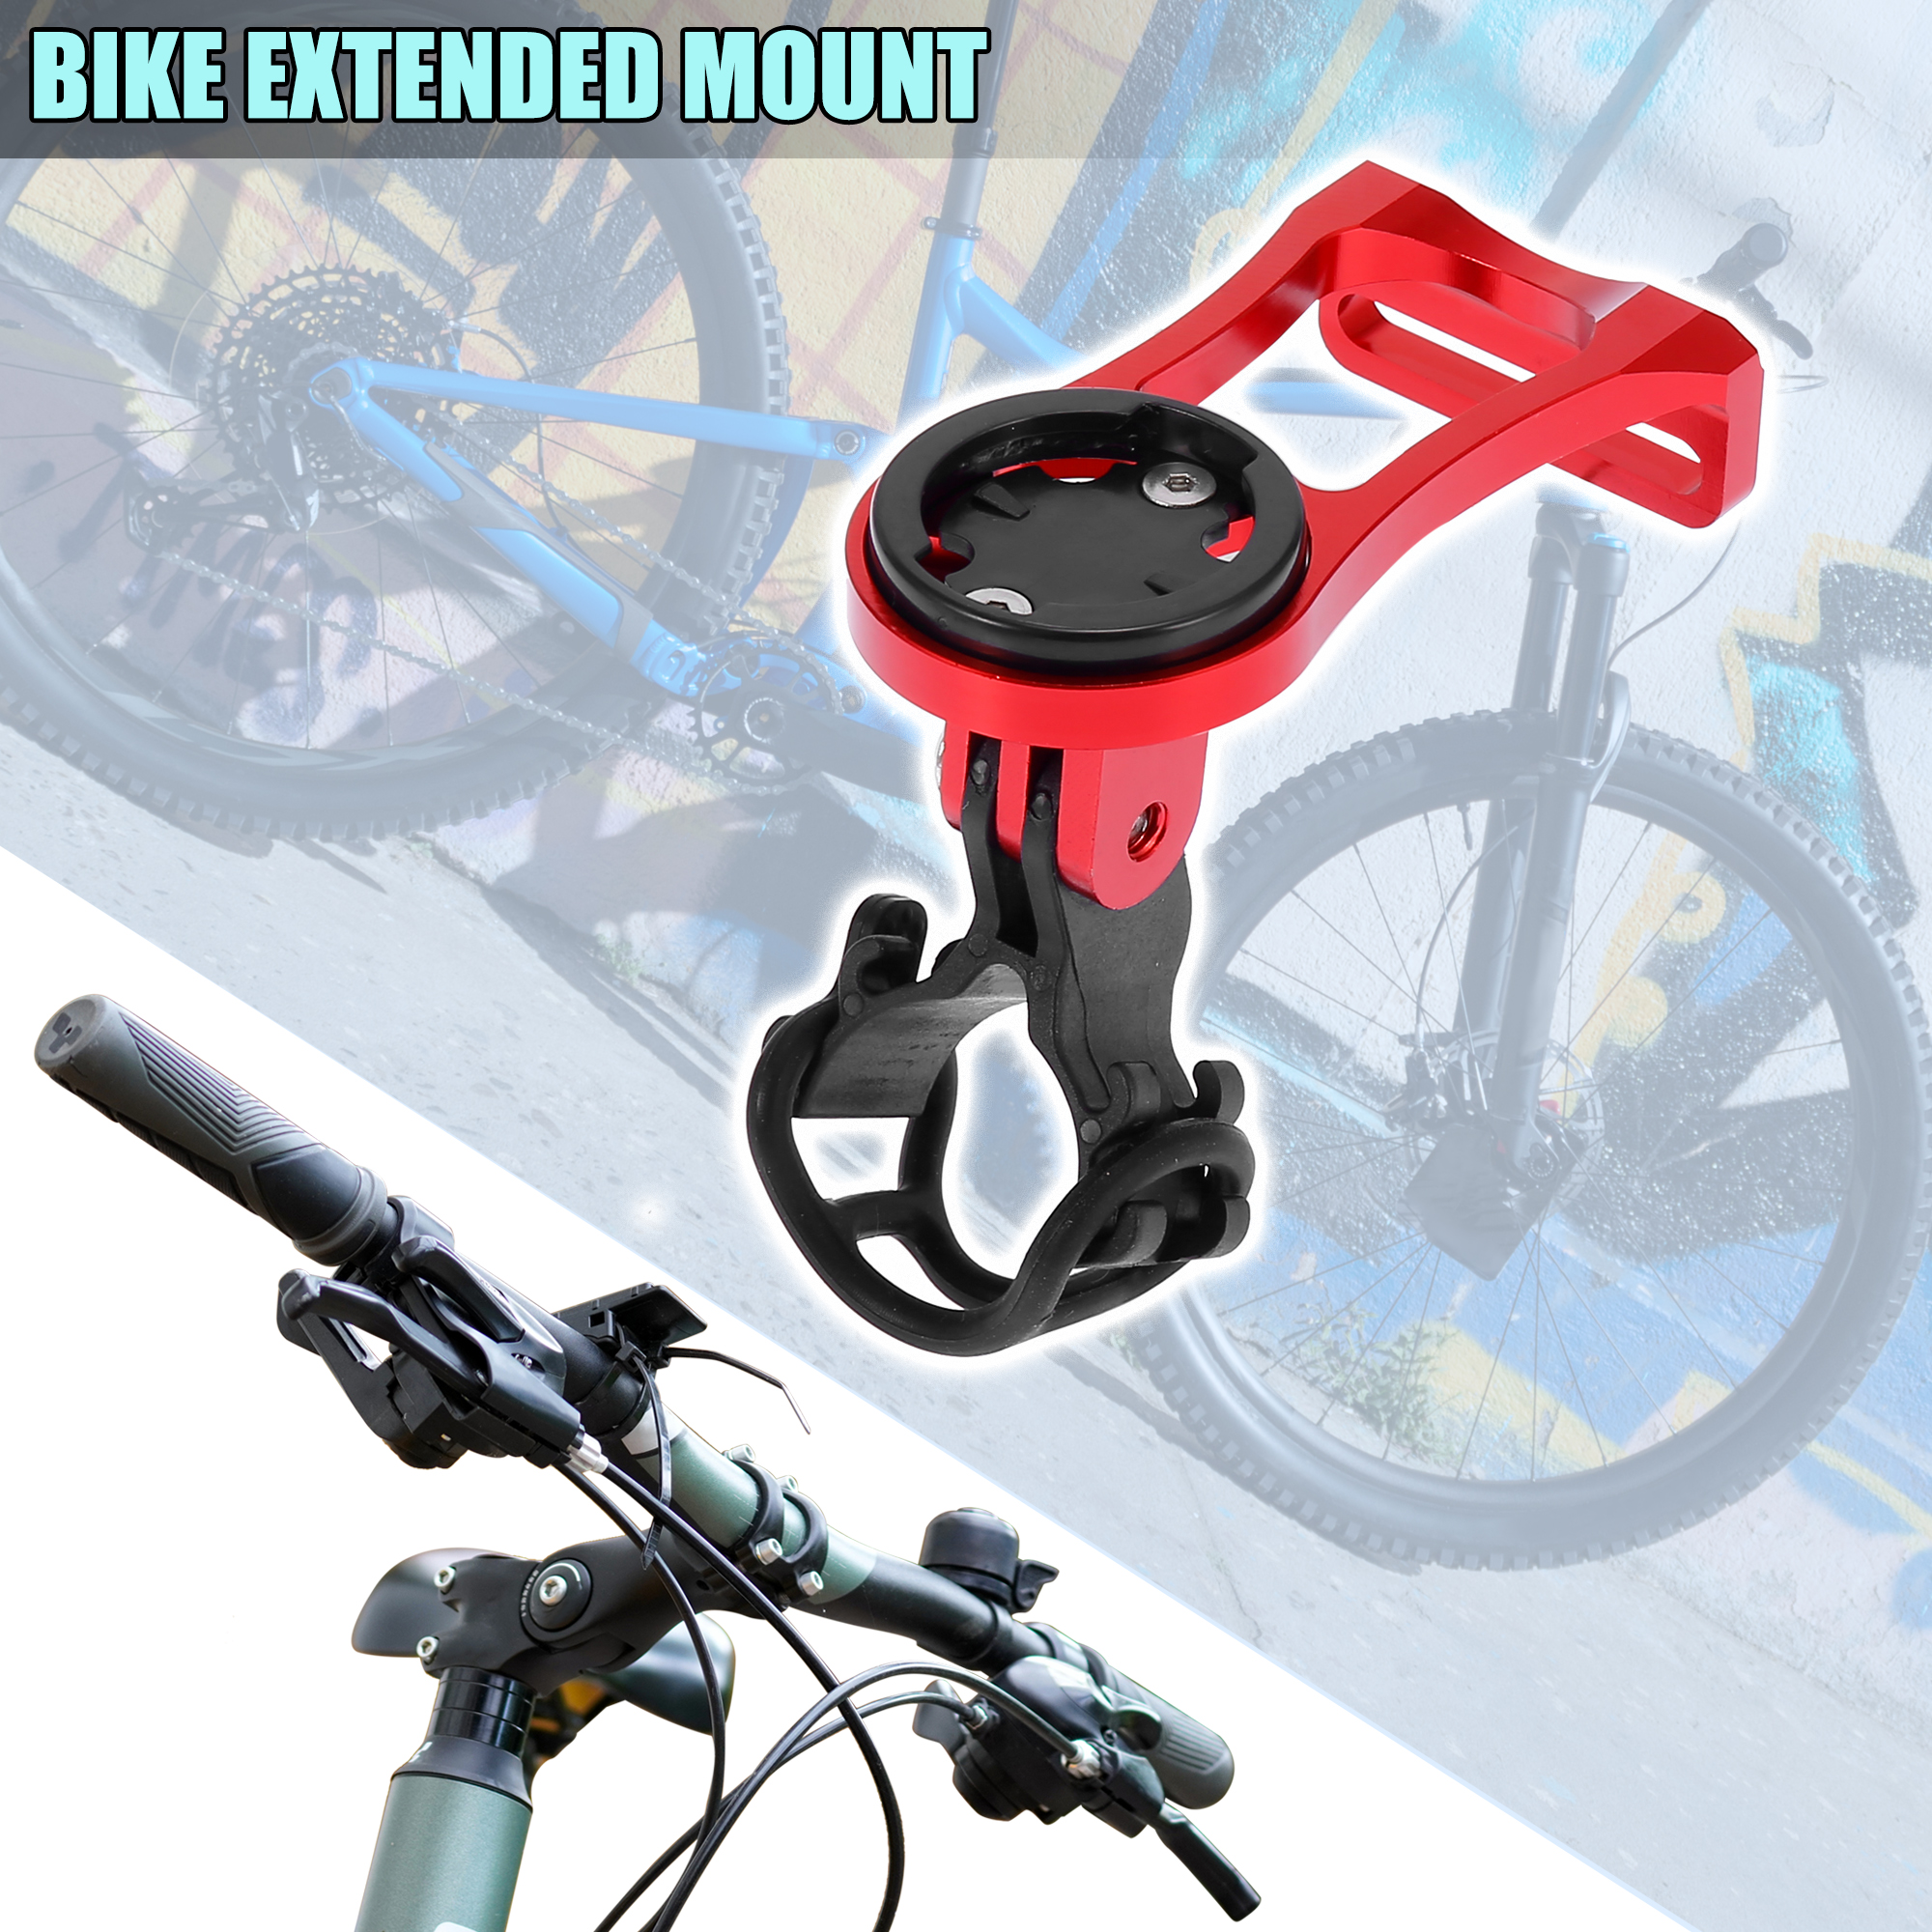 Unique Bargains 1 Set Bike GPS Cycling Computer Extended Mount for Garmin Edge 520 800 Red